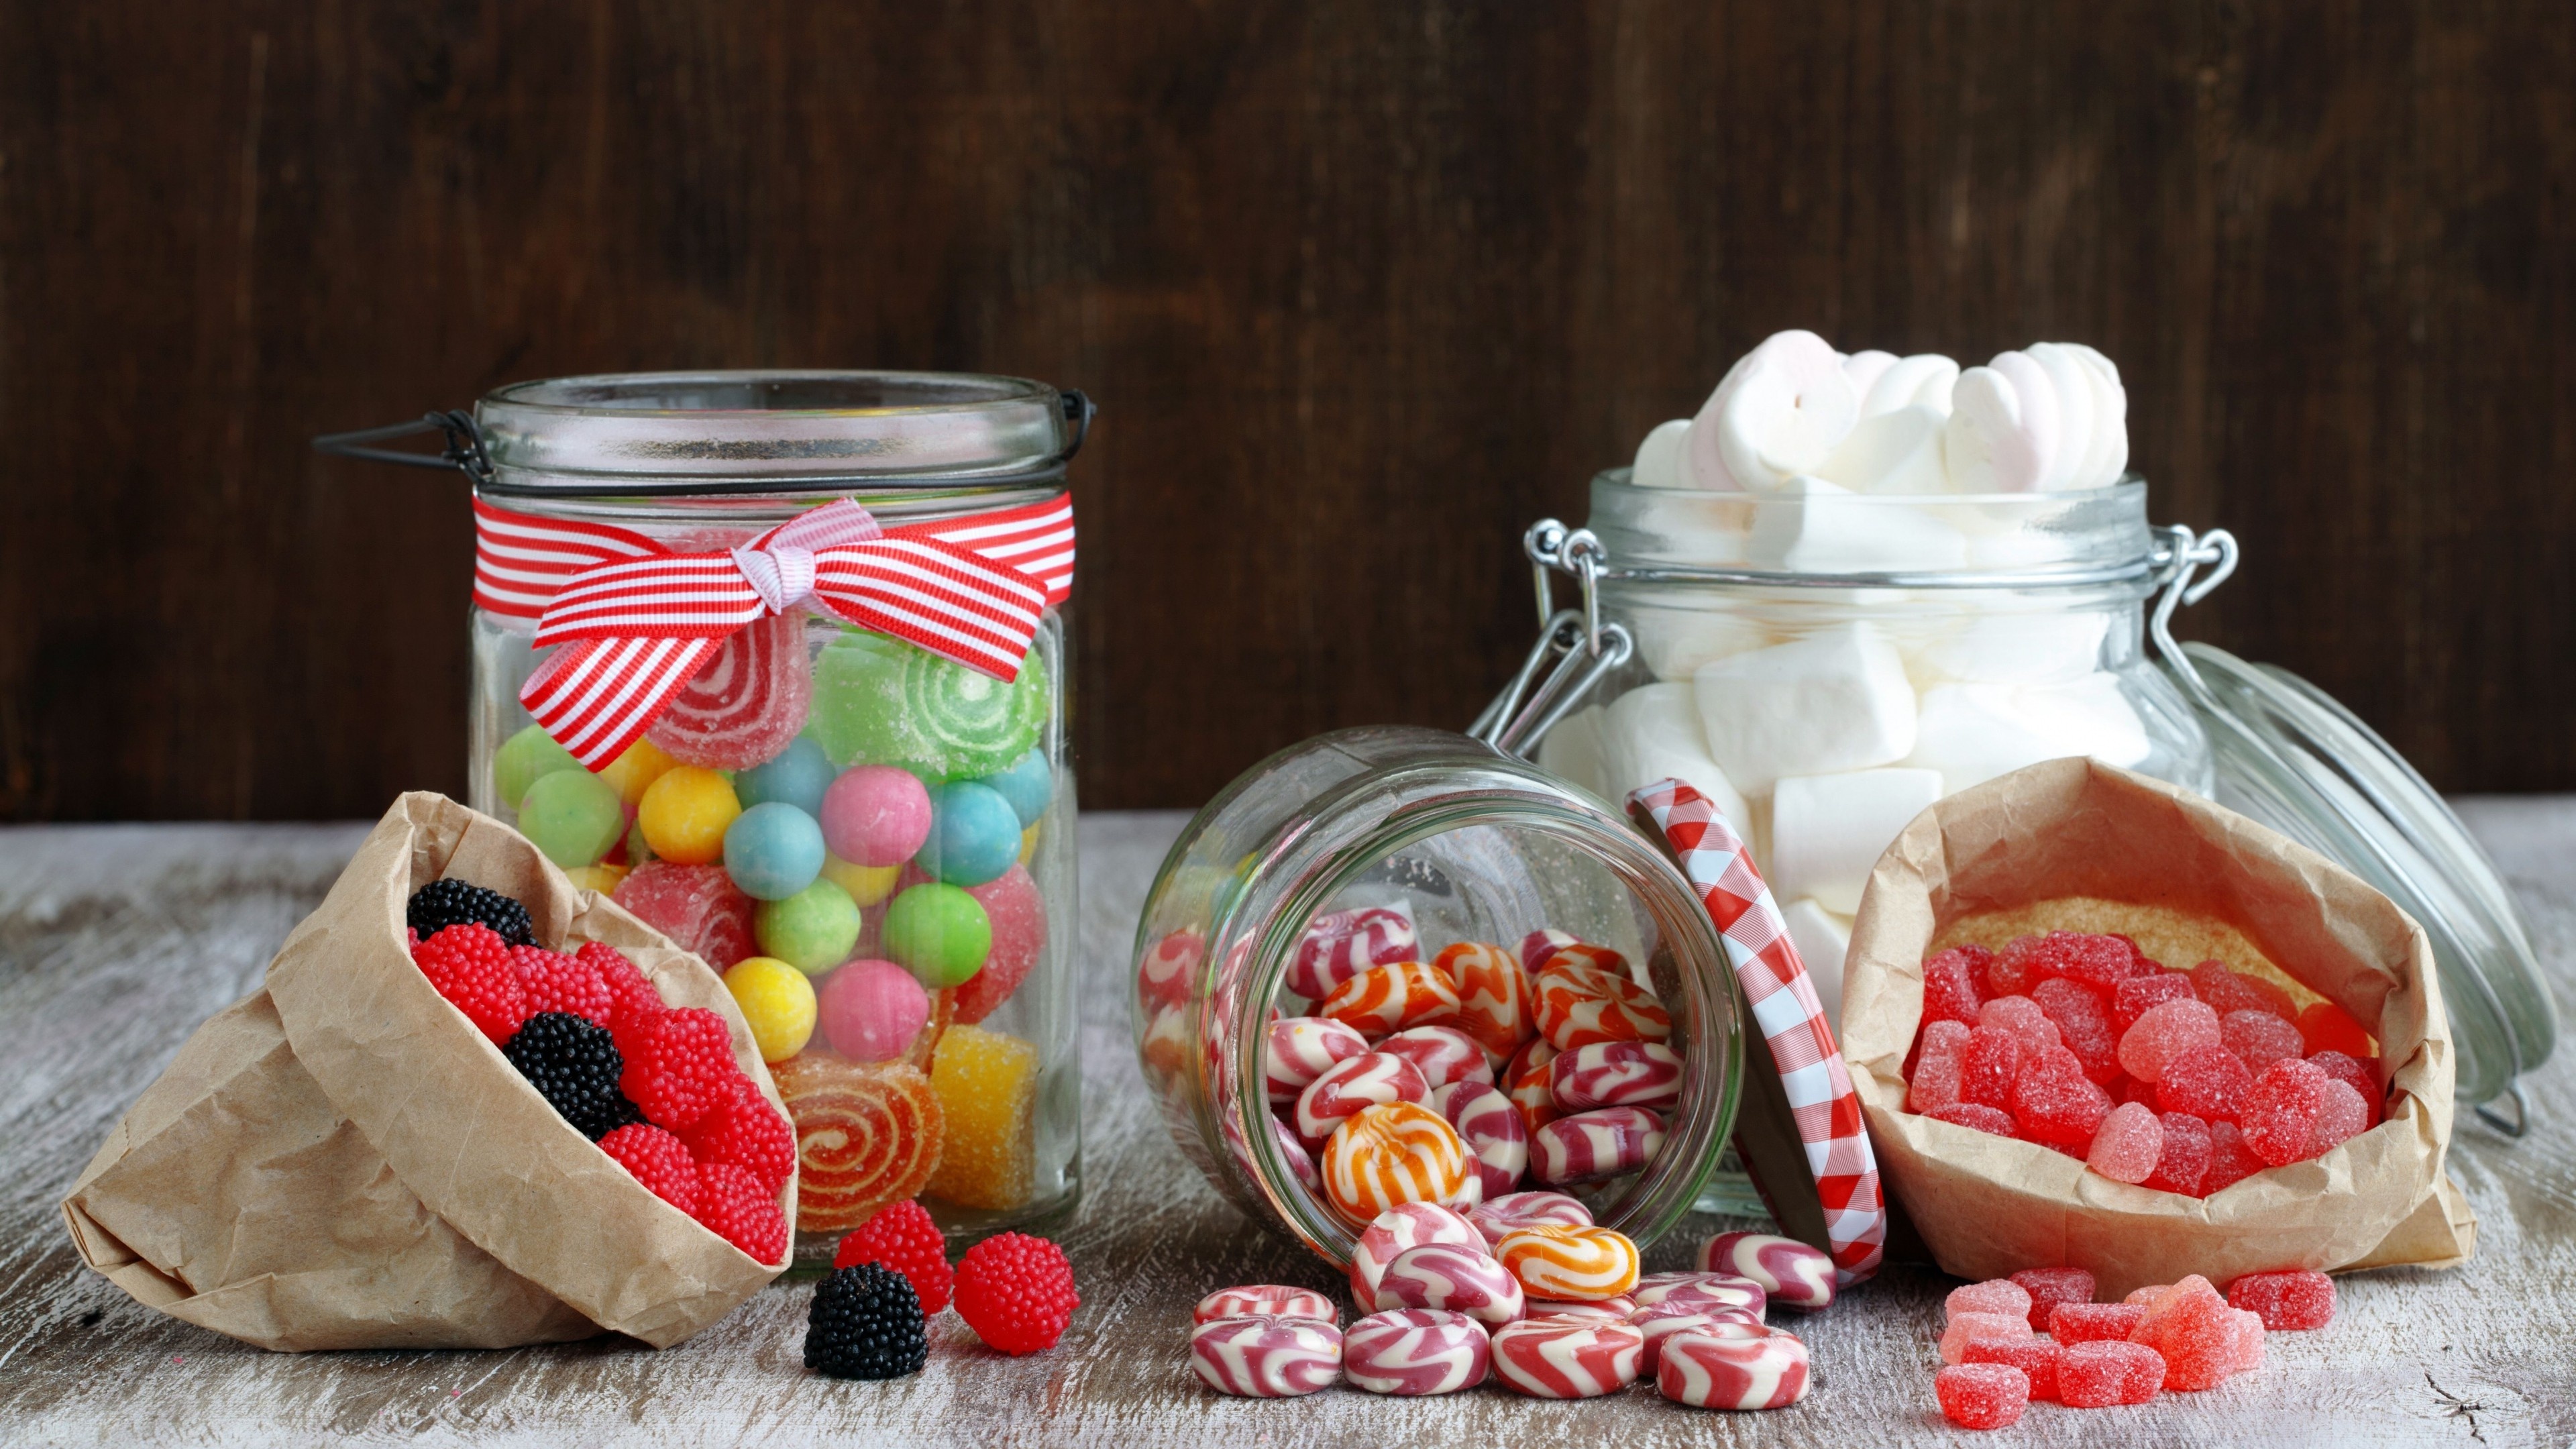 Candy jar delight, Sweet and tempting, Sugary goodness, Delicious treats, 3840x2160 4K Desktop